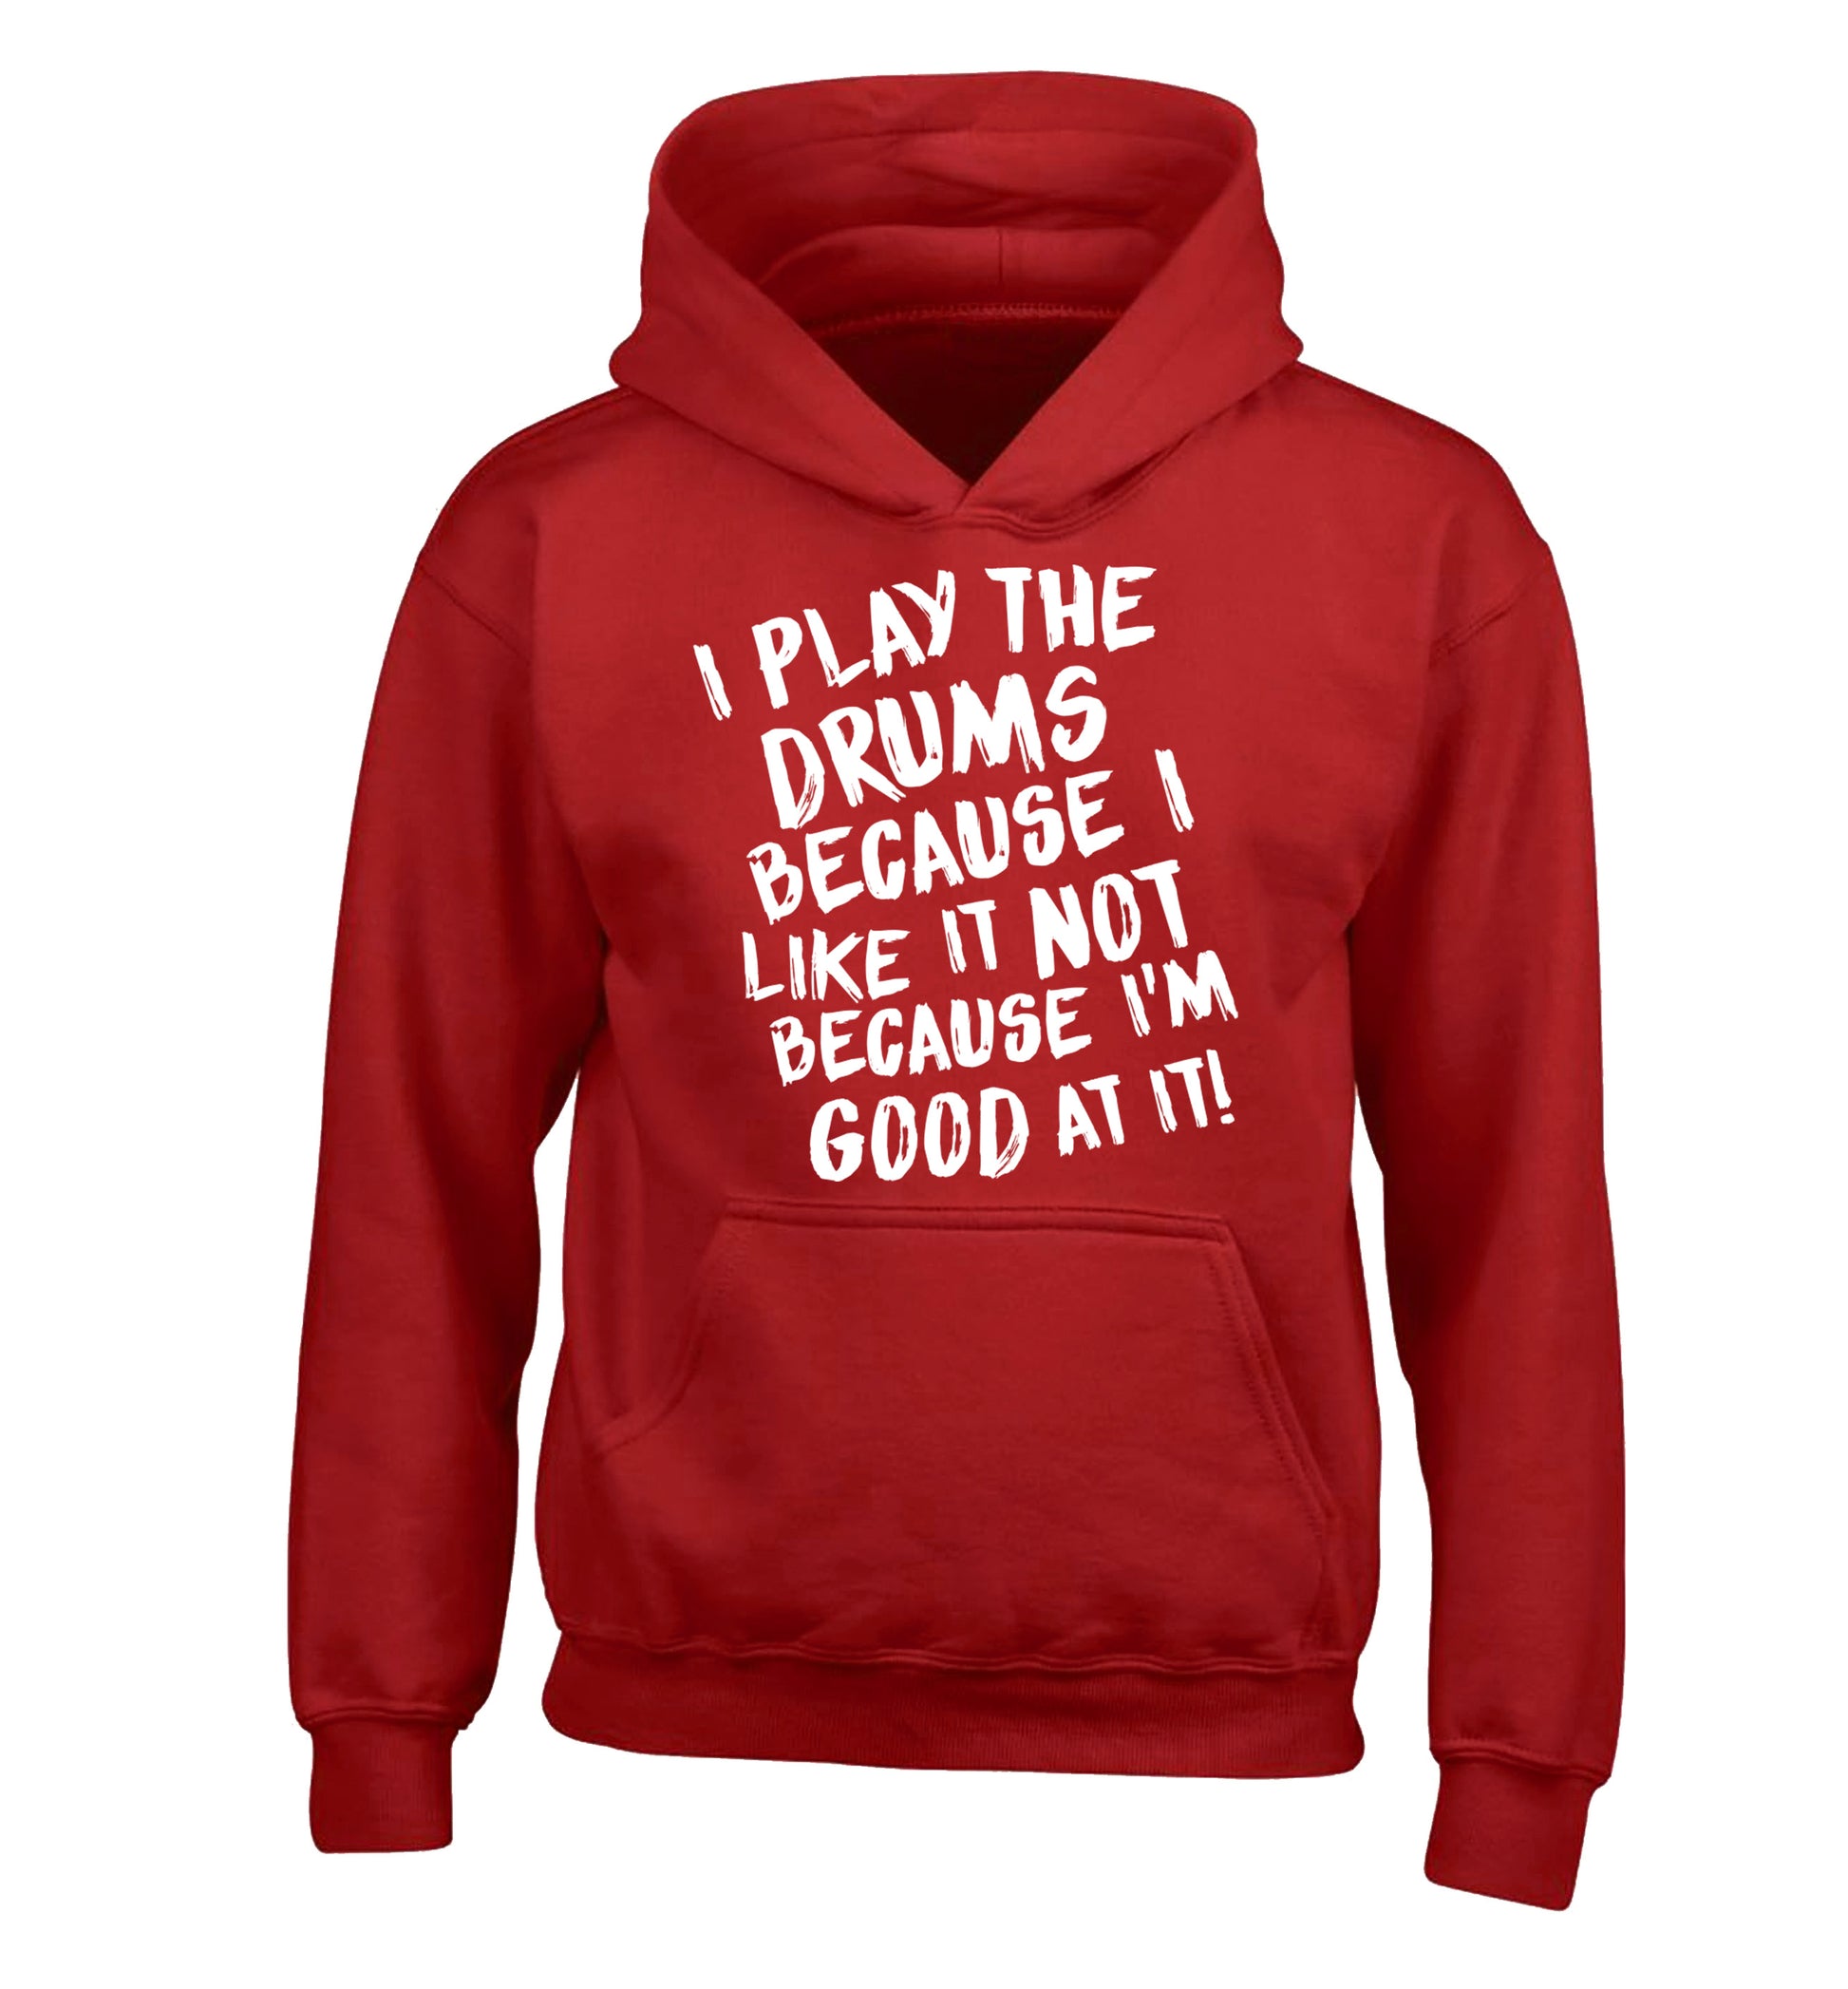 I play the drums because I like it not because I'm good at it children's red hoodie 12-14 Years